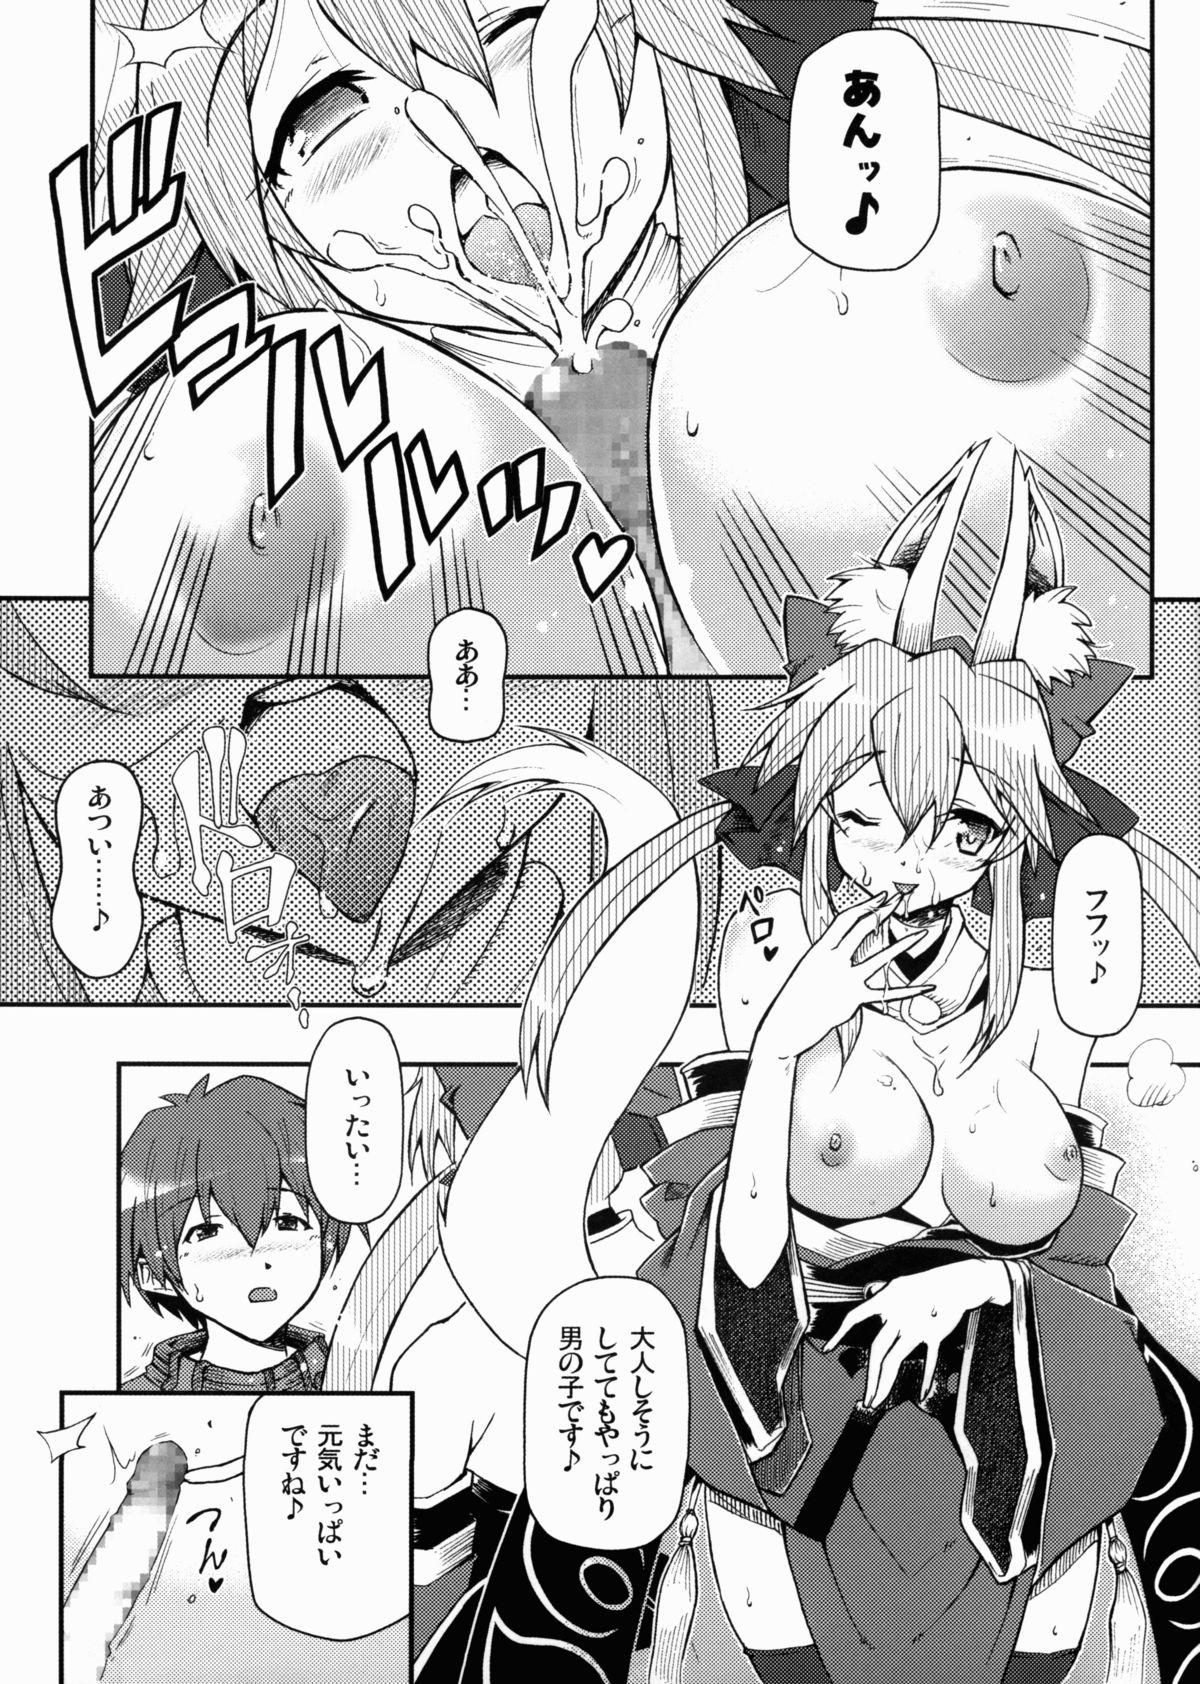 Tugging 21st CENTURY FOX - Fate extra Blow Job - Page 10